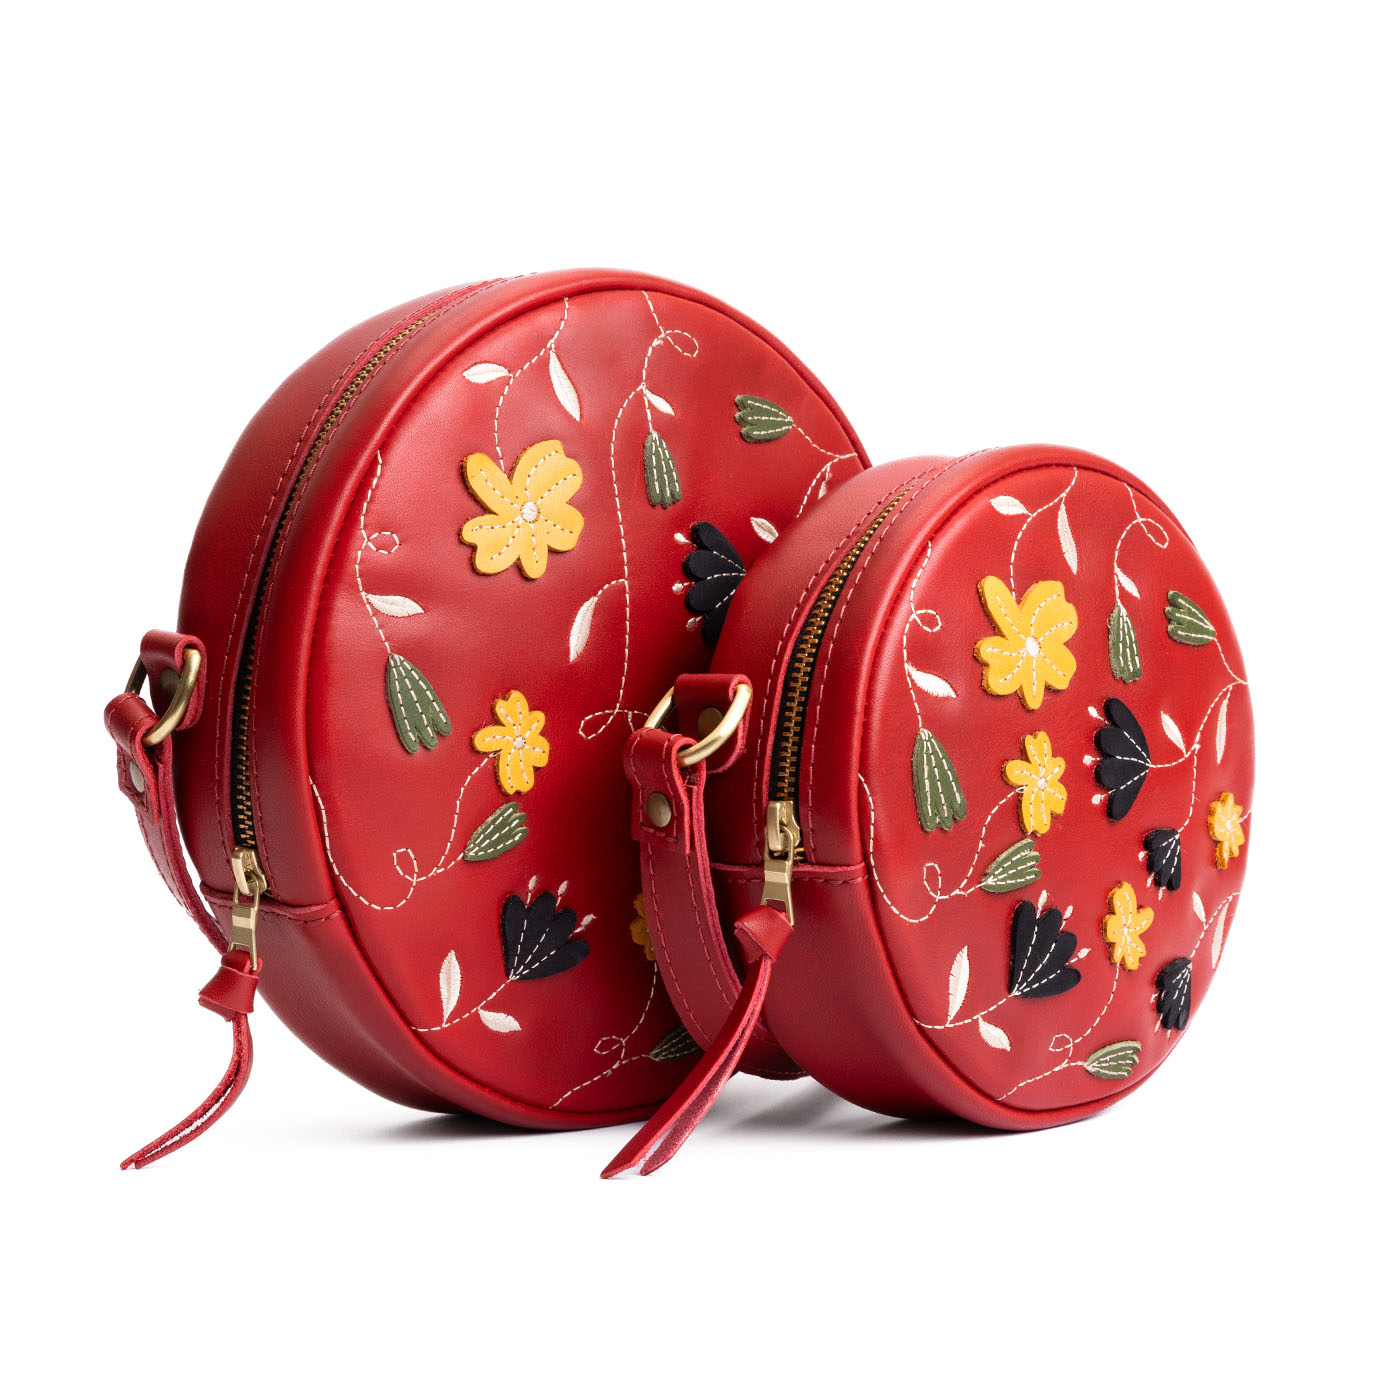 Folklore Ruby | Circle shaped crossbody bag with embroidered flower design